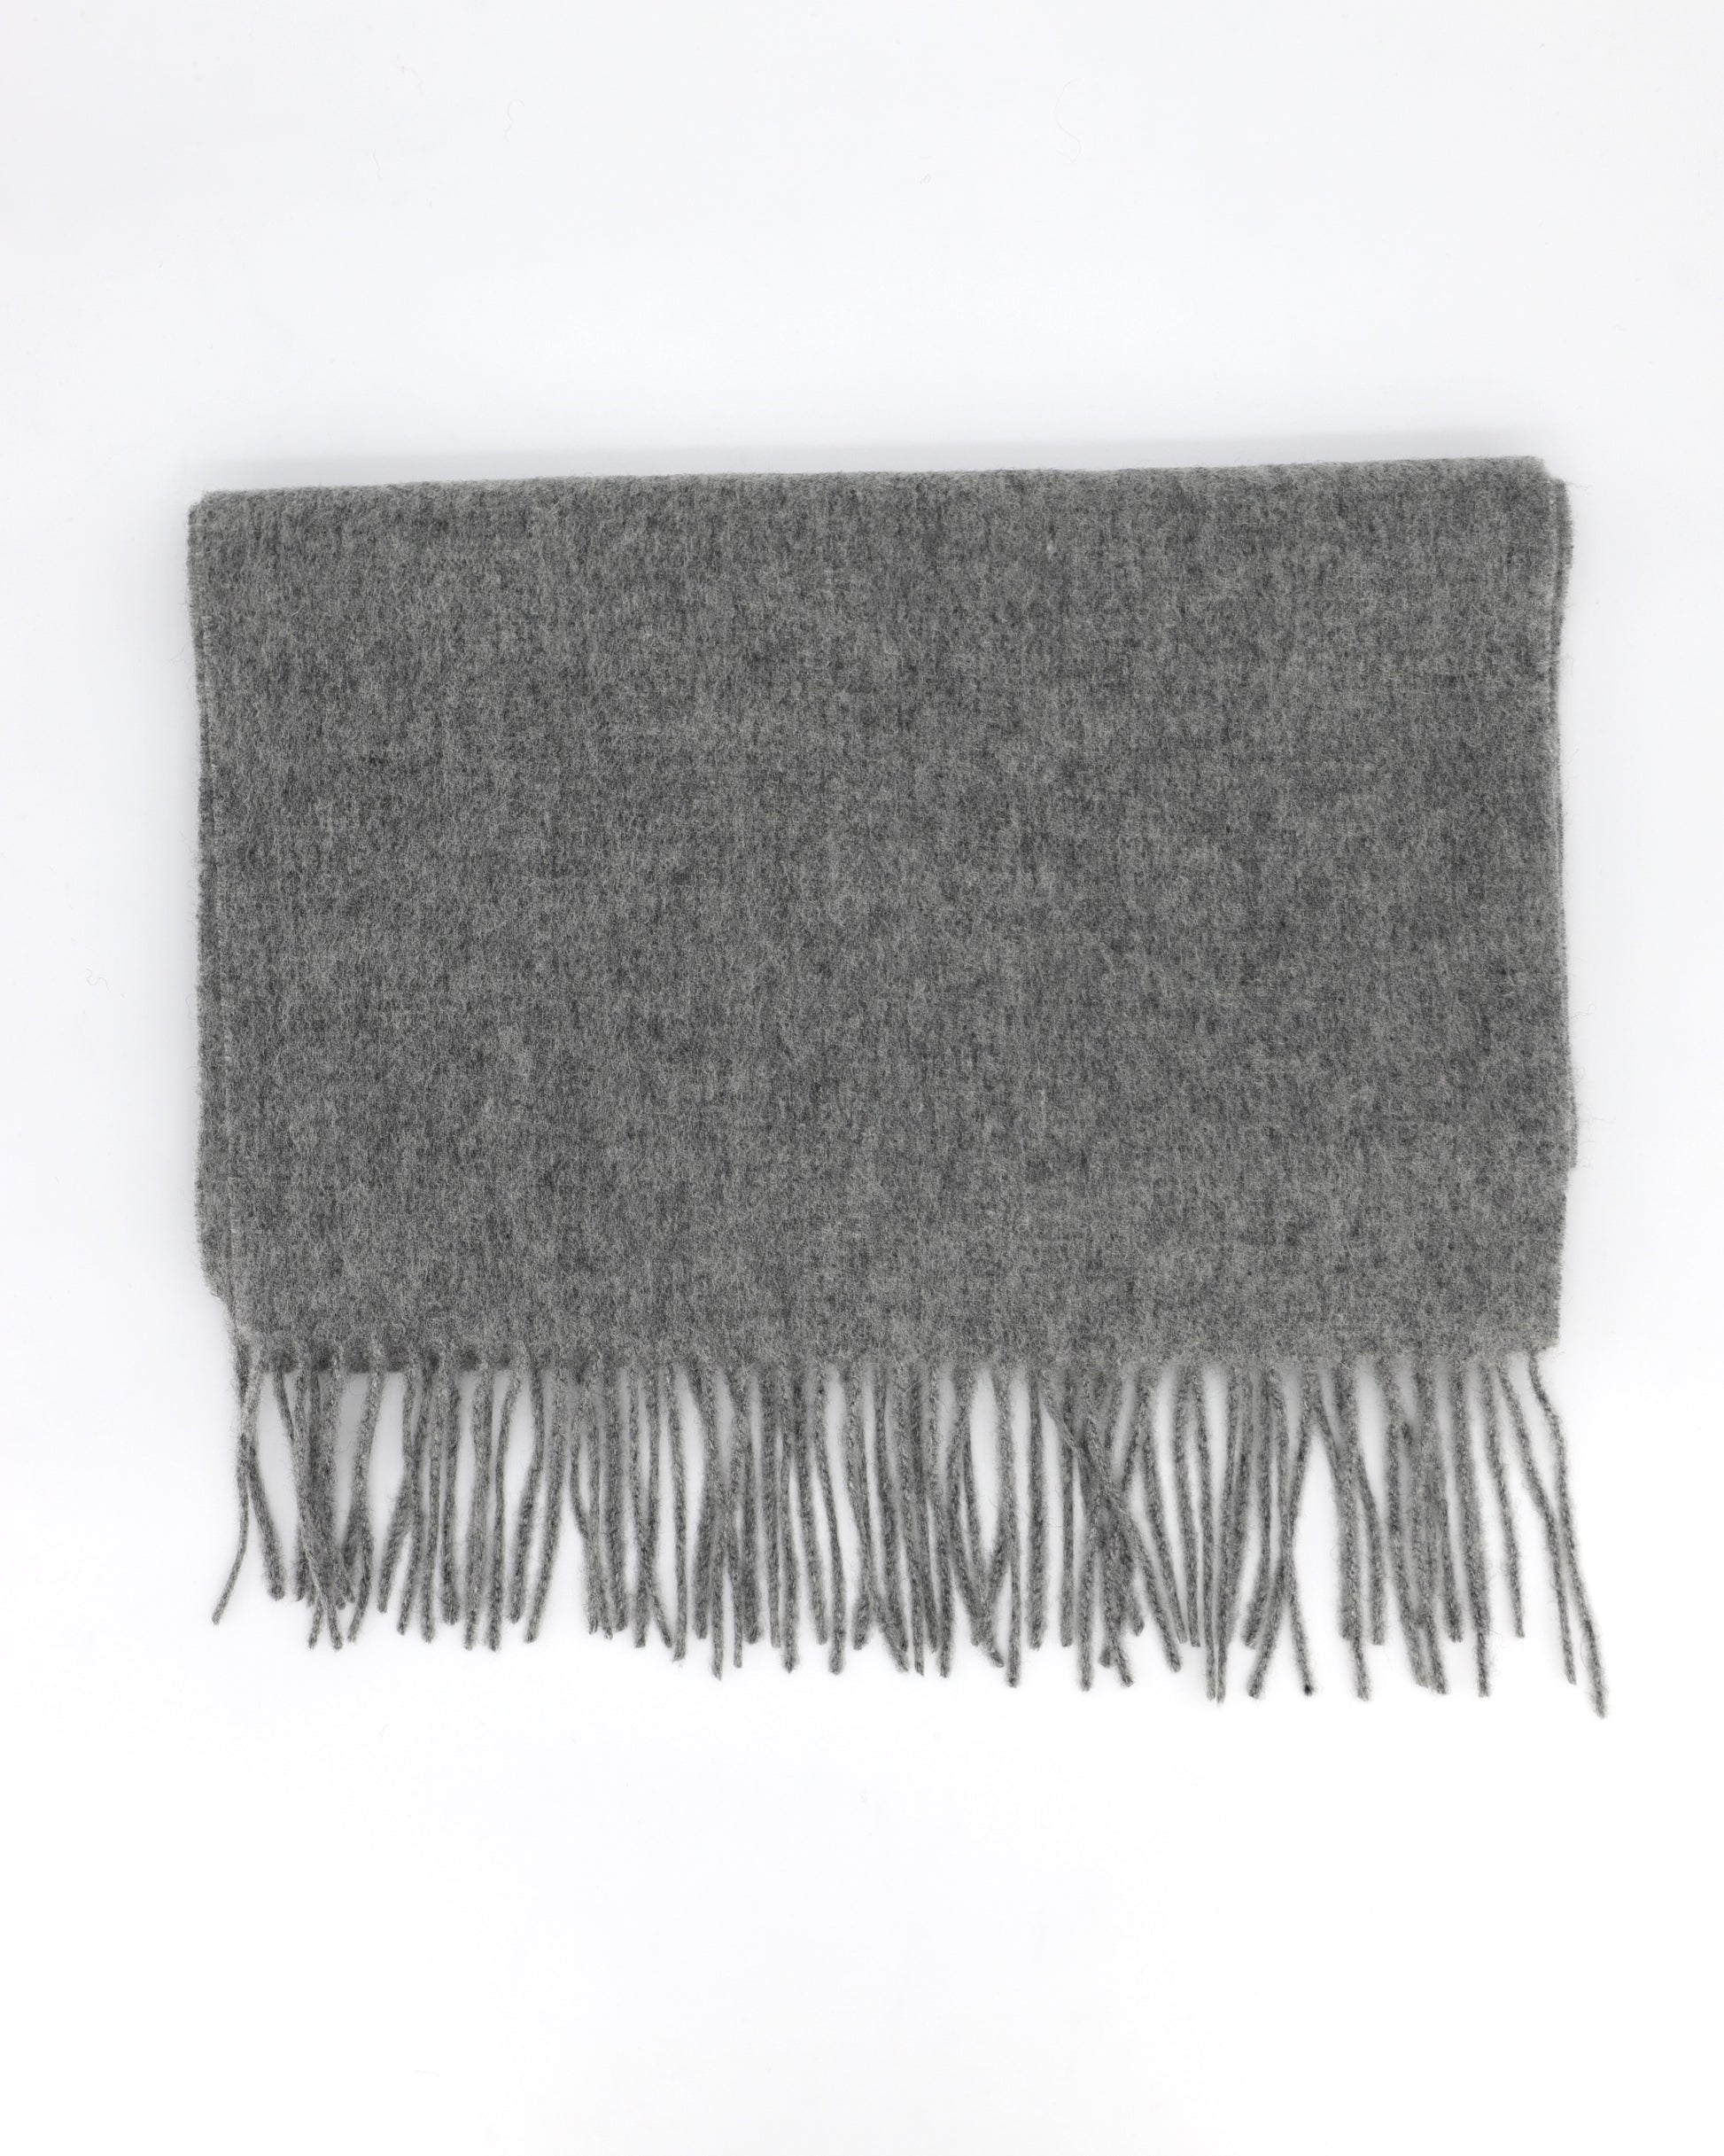 This Scarf is a finest 100% natural merino wool scarf from Villanelle. A luxurious and classic accessory for women and for men and made made from the softest natural merino wool in medium grey color for extreme comfort, warmth, a great look and feeling. This product is sourced in Italy and manufactured in Poland.